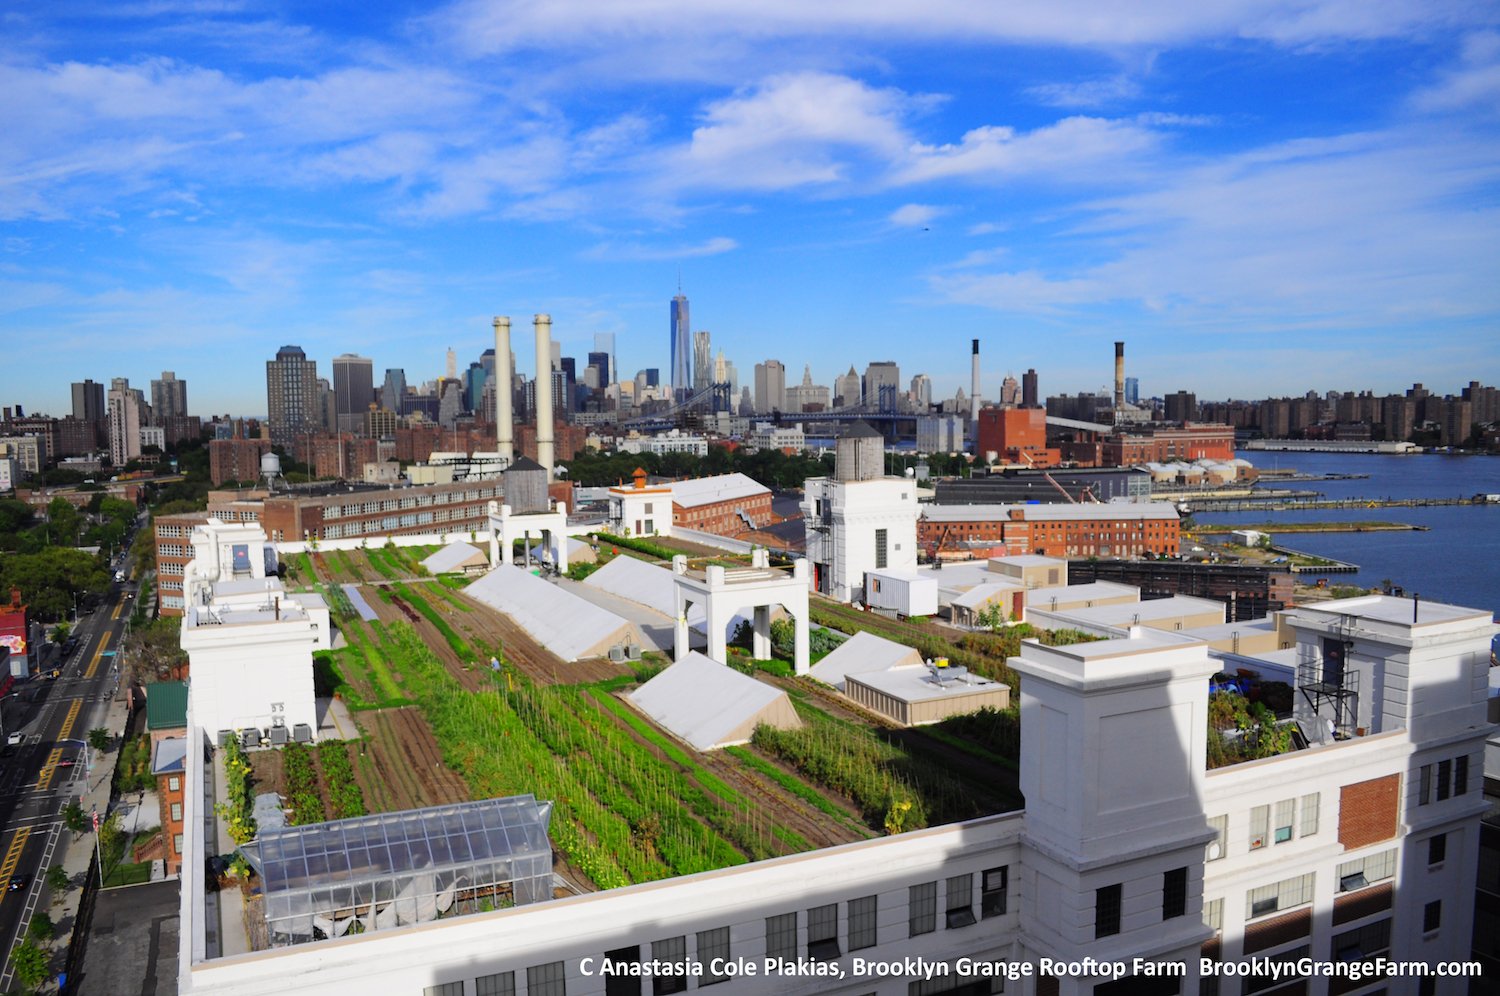 One of Brooklyn Grange’s rooftop farms in Brooklyn (not used in this study).